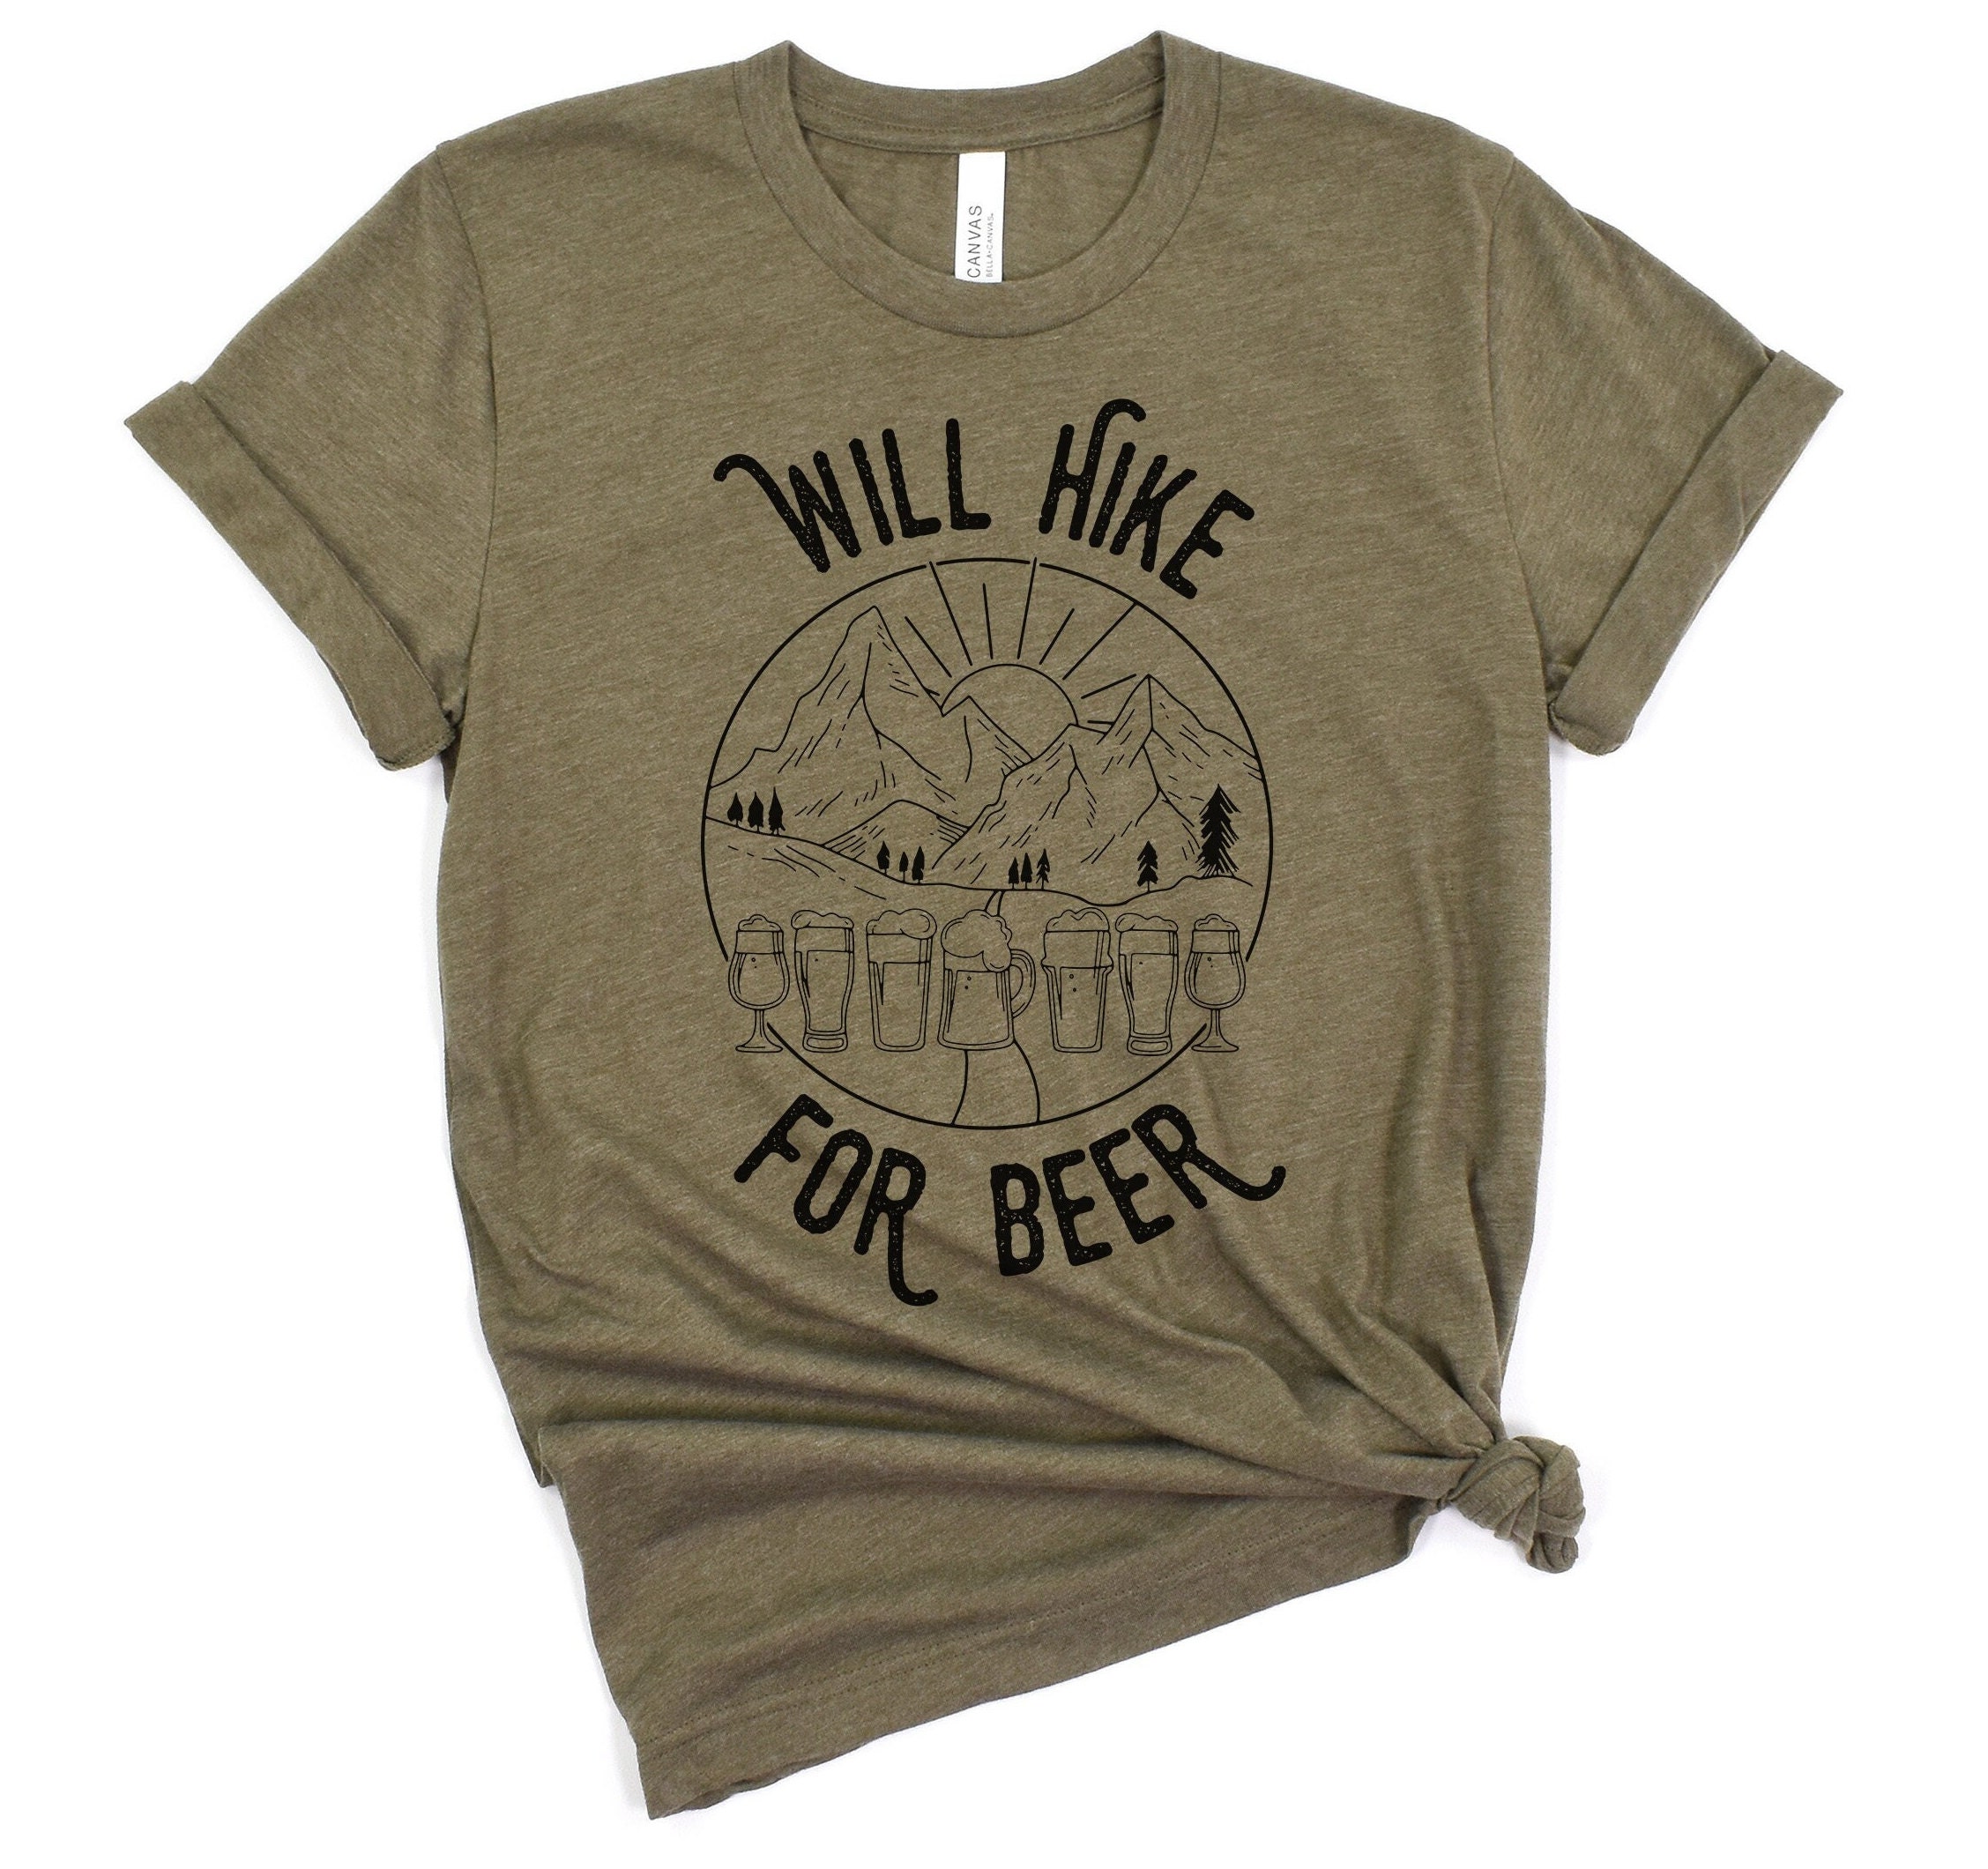 Will Hike for Beer Tee, Hiking Shirt, Beer Lover Shirt, Craft Beer Shirt,  Gift for Beer Lover, Outdoorsy Shirt, Hiking Beer Shirt, Beer Snob -   Denmark